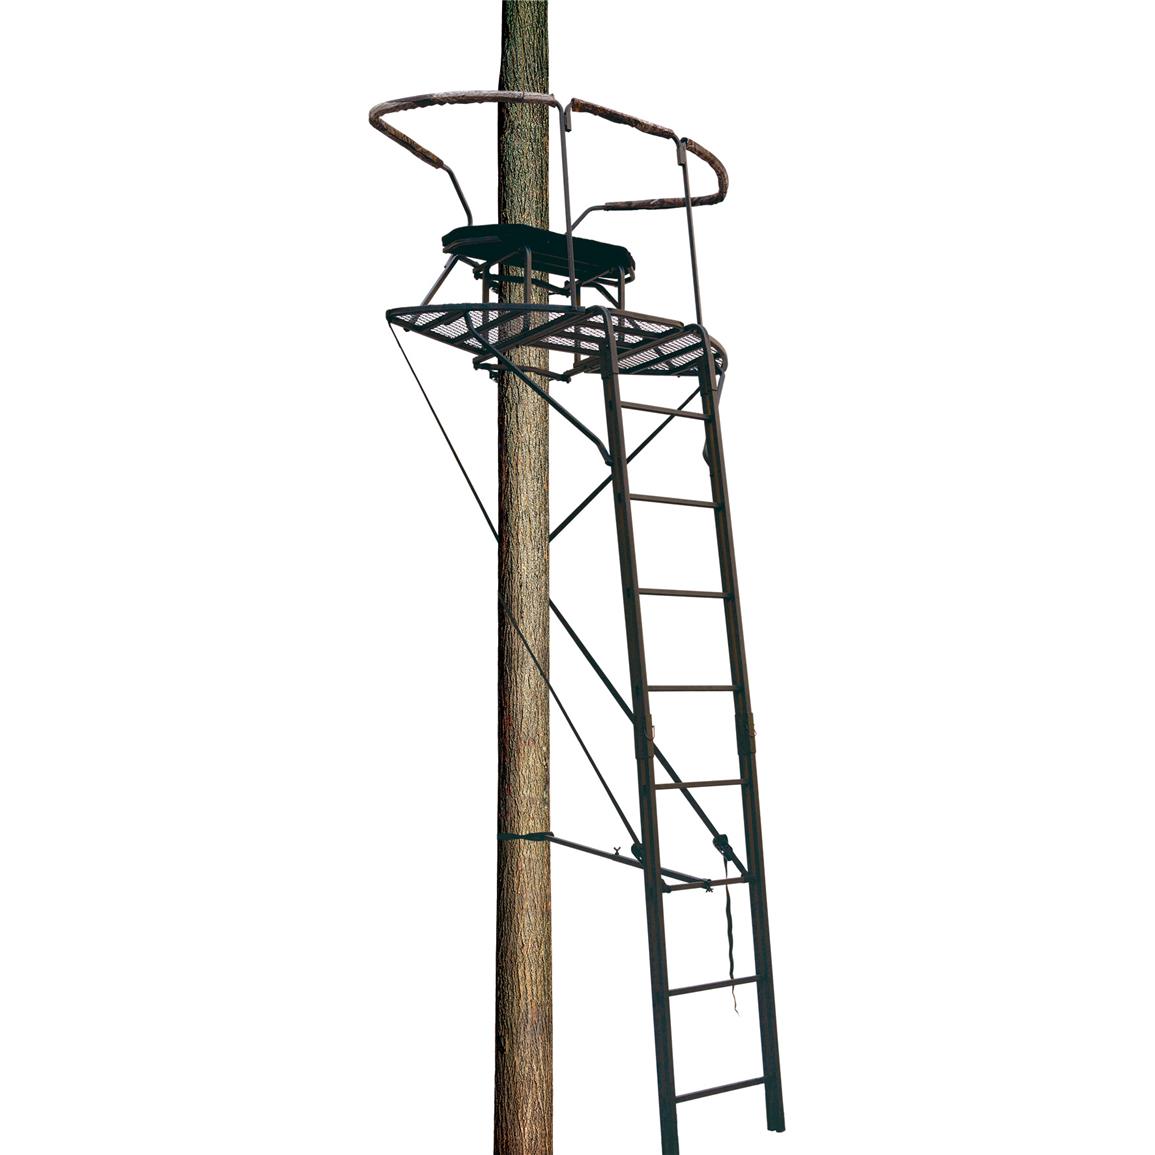 Big Dog Stadium Series 17.5' 2-Man Tree Stand With Blind - 649089, Ladder  Tree Stands at Sportsman's Guide